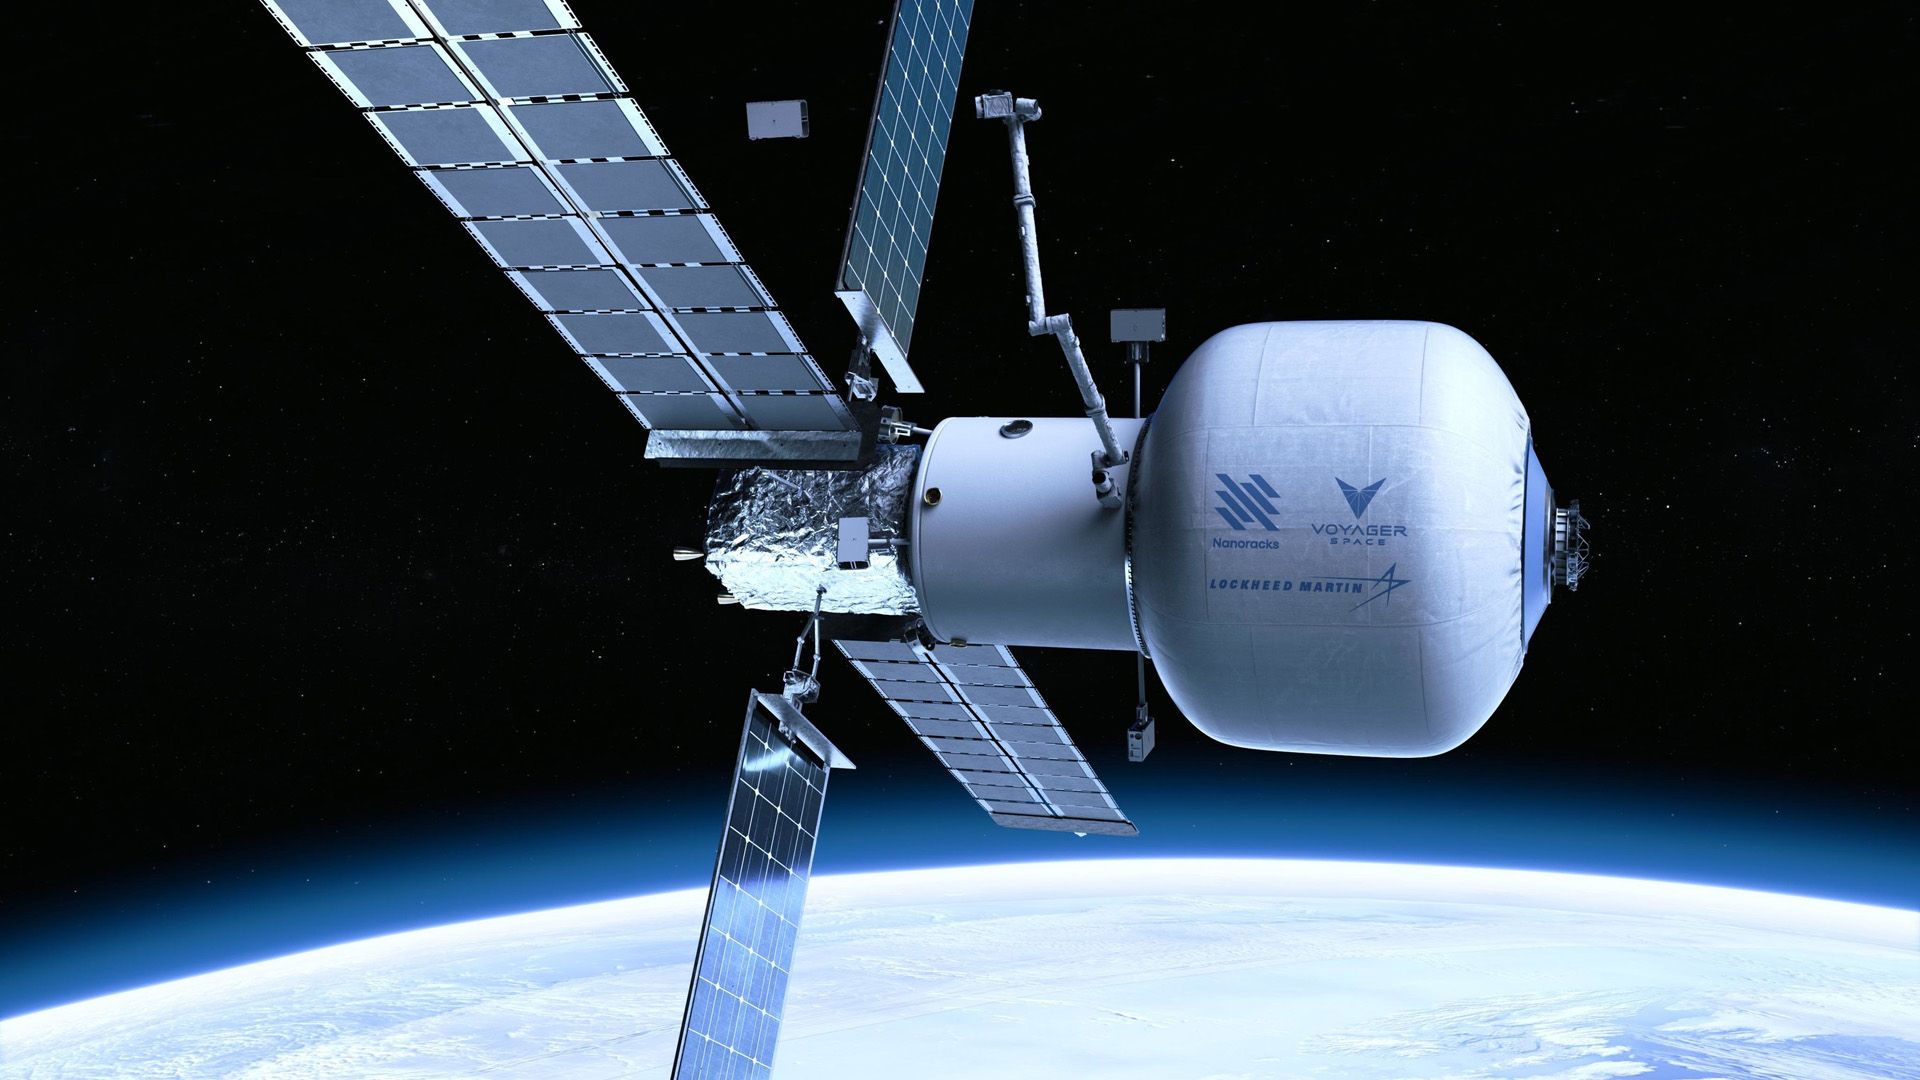 An artist's illustration of the Starlab private space station floating above Earth. Several solar panels extend outward in an 'X' shape on the left side of the image, while a large, rounded white capsule extends to the right.